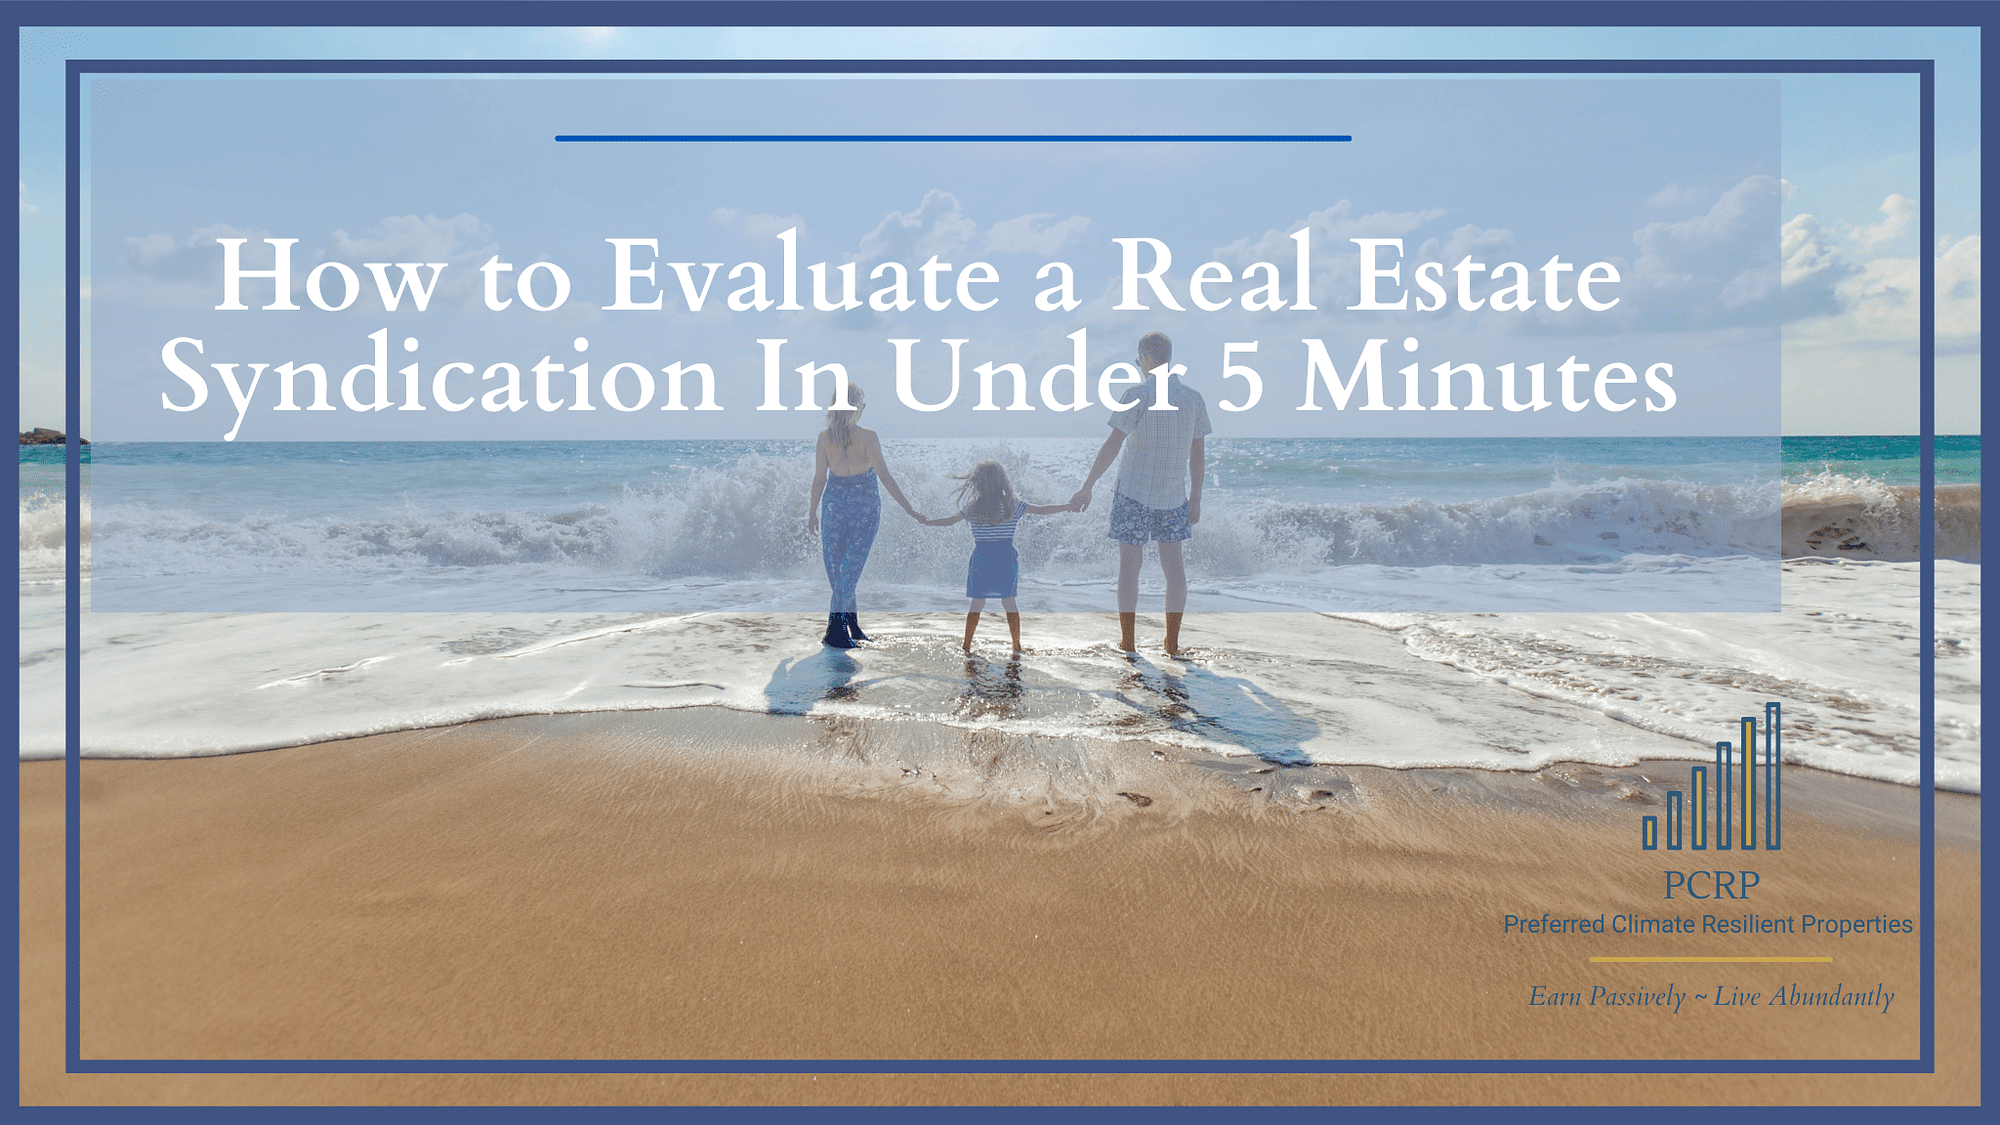 How to evaluate a real estate syndication